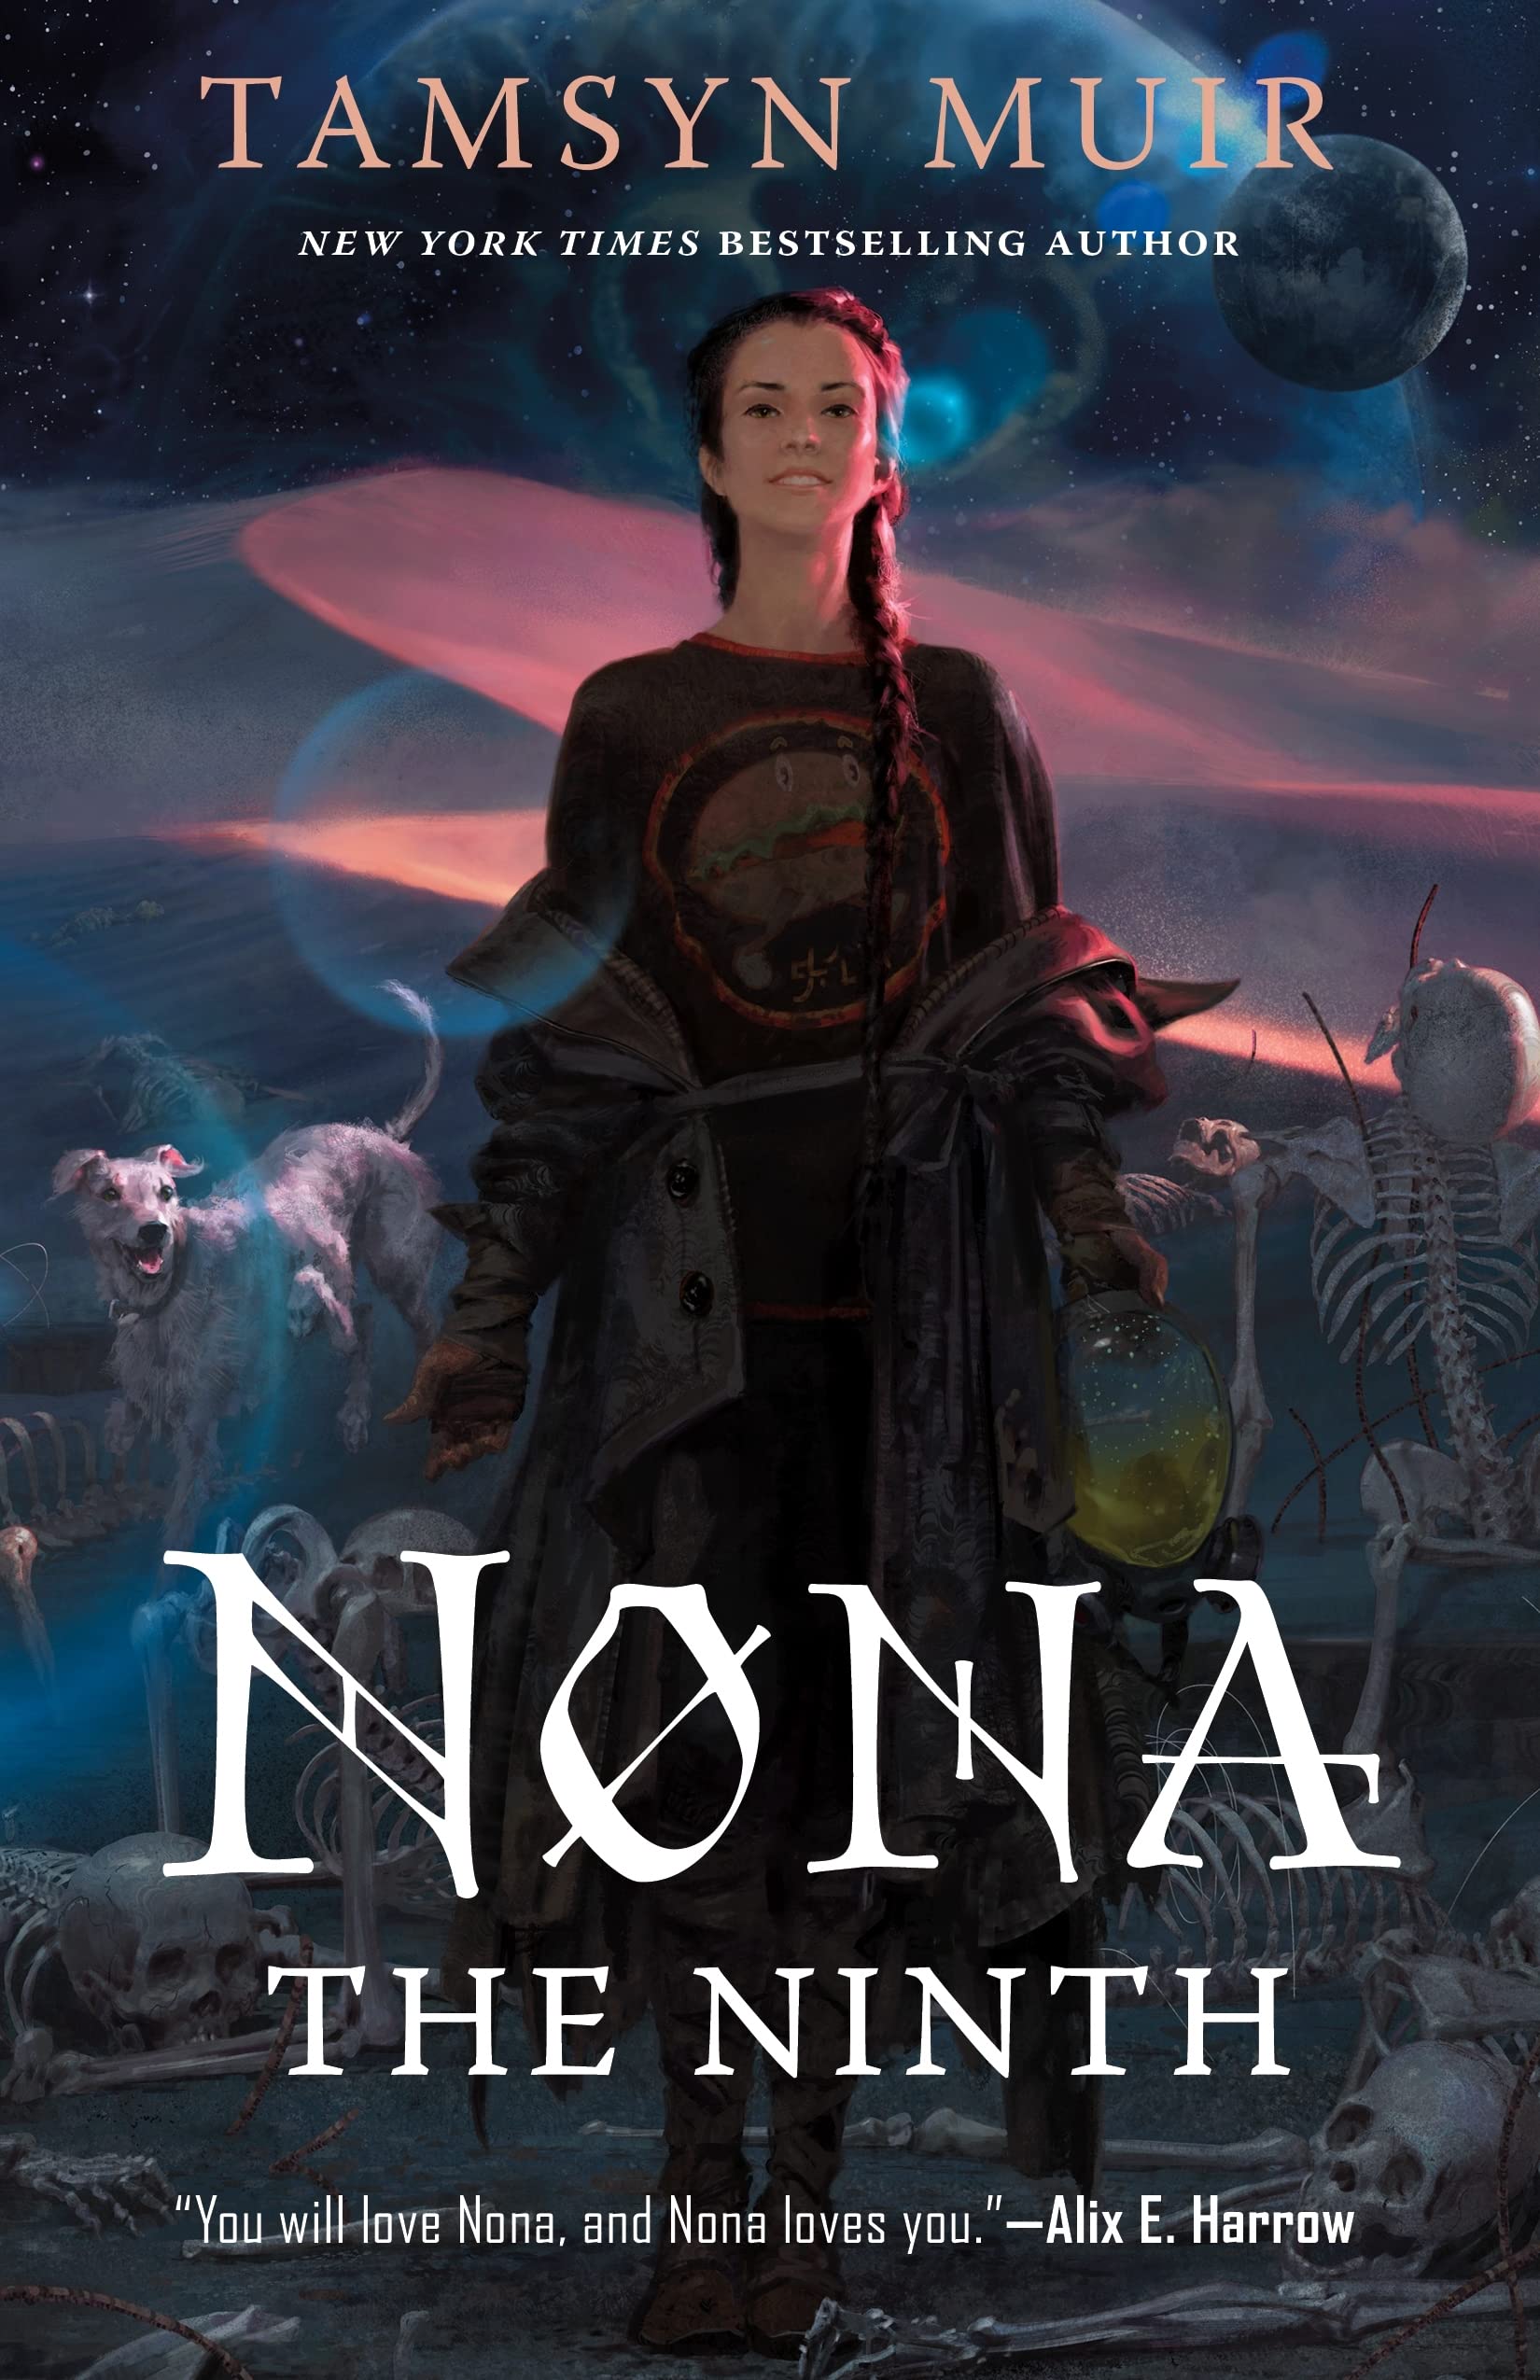 Cover for Tamsyn Muir's Nona the Ninth, third book in the Locked Tomb series.